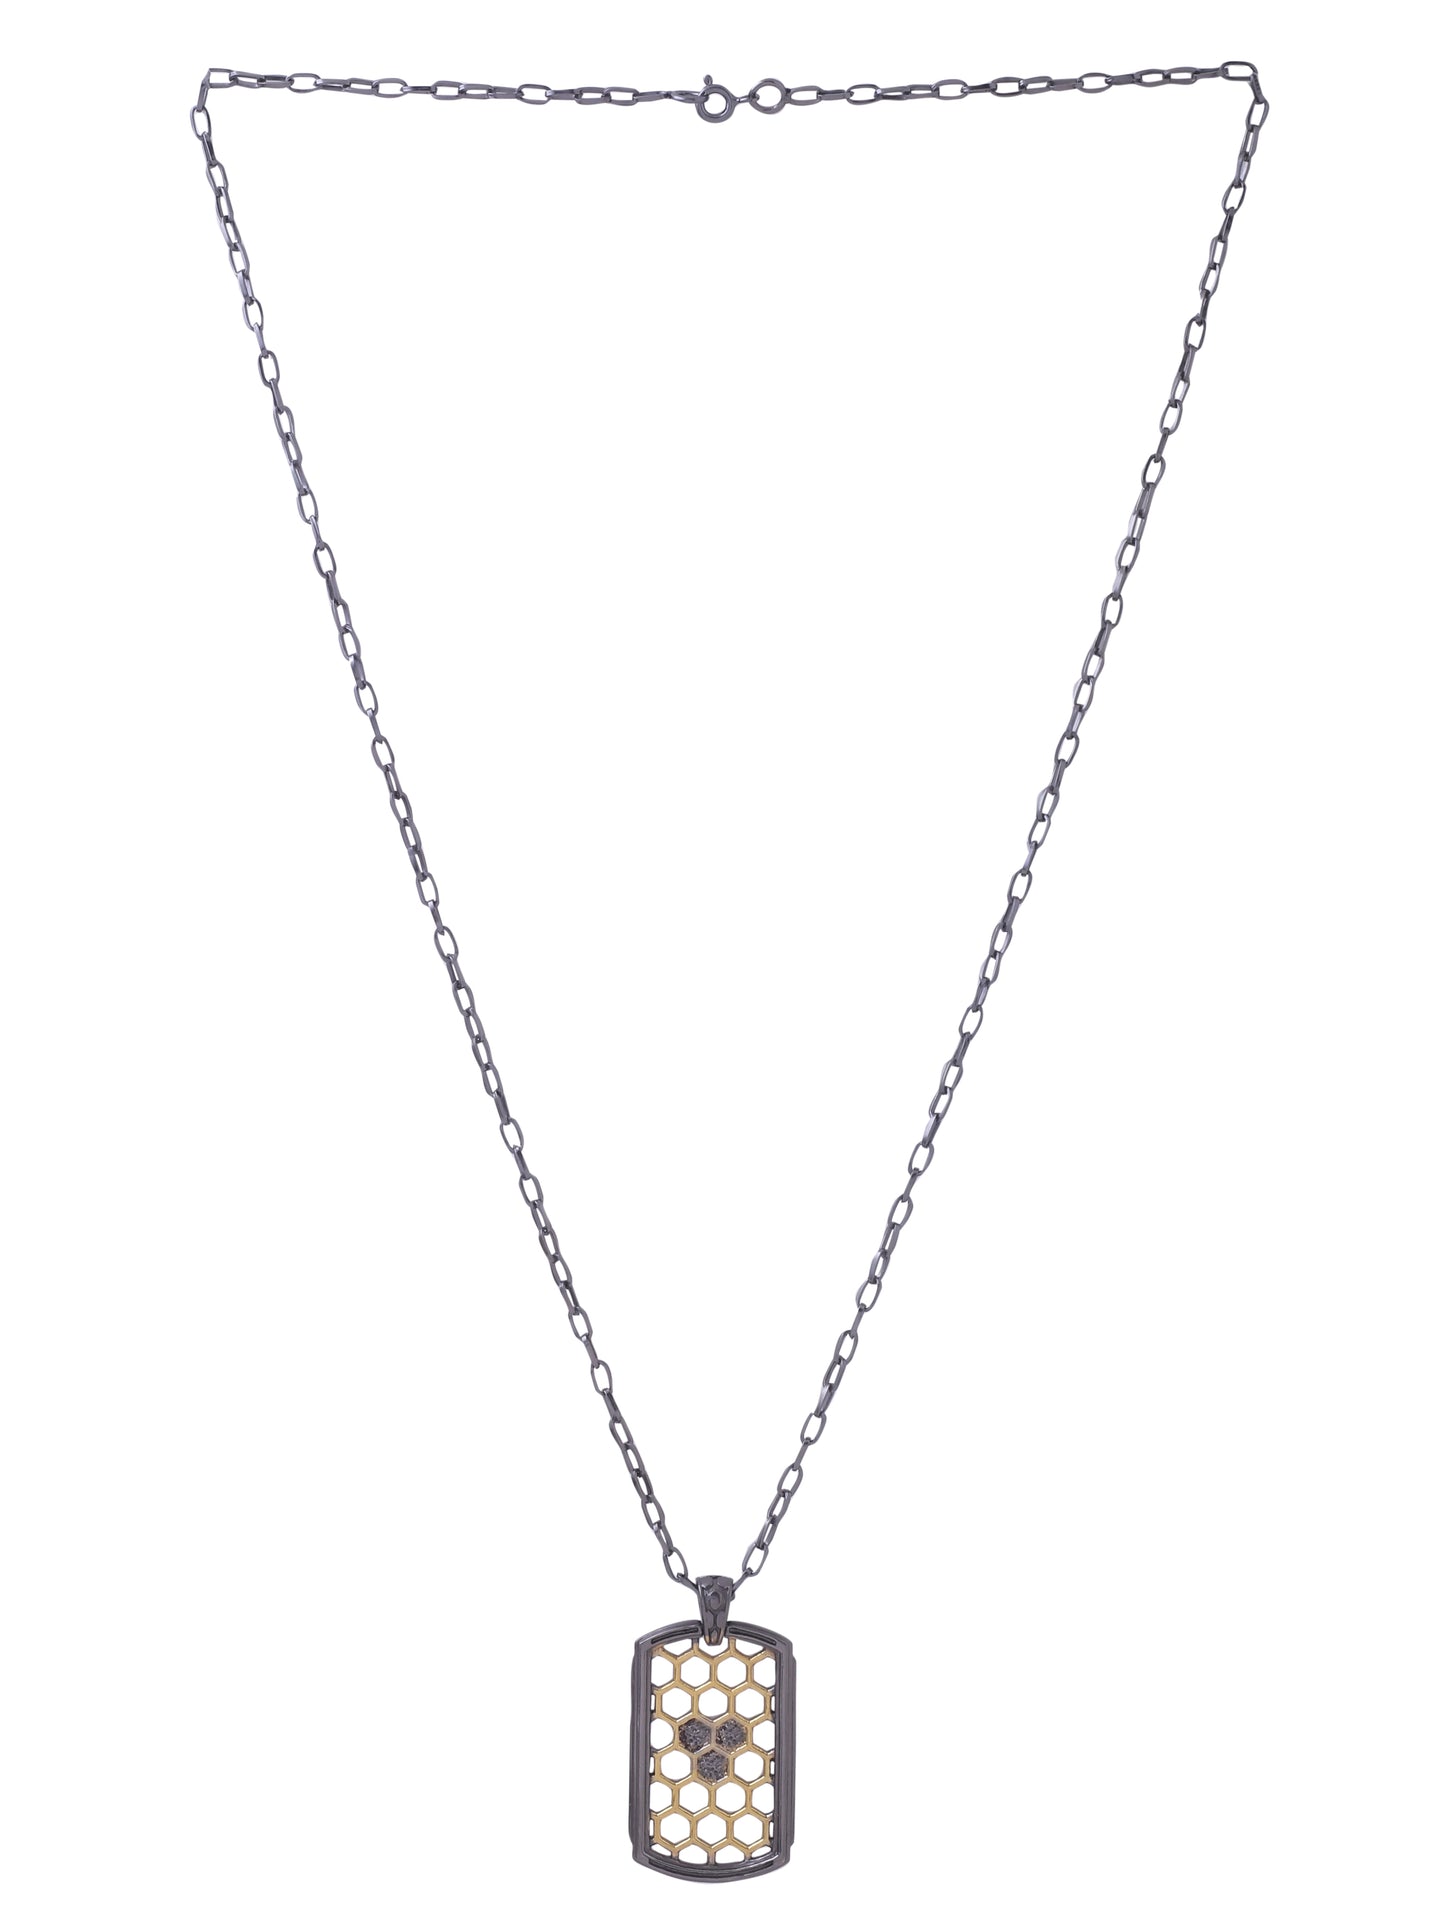 Luminary's Cipher gold pendant with chain